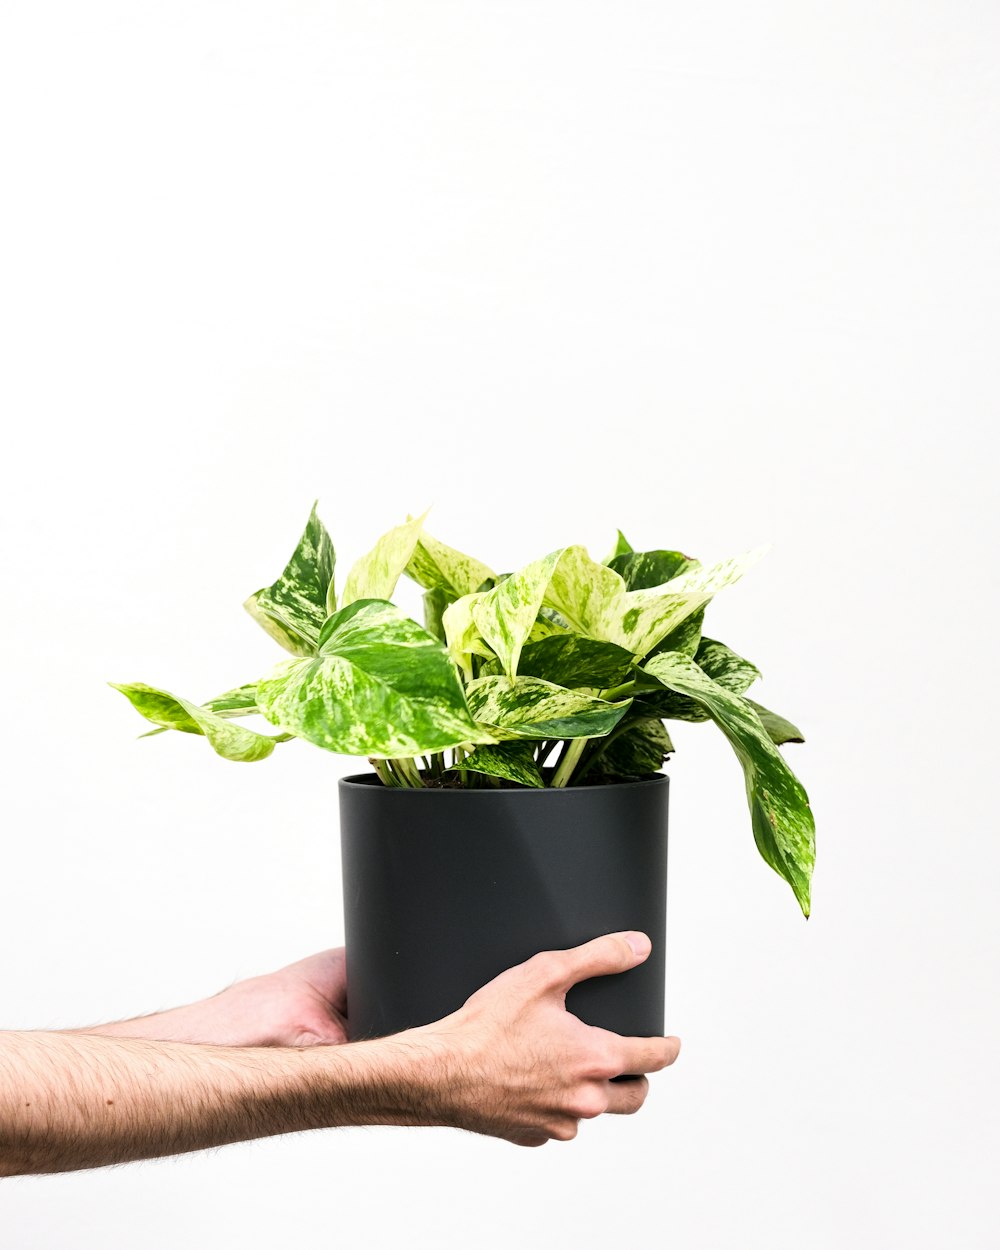 a hand holding a potted plant